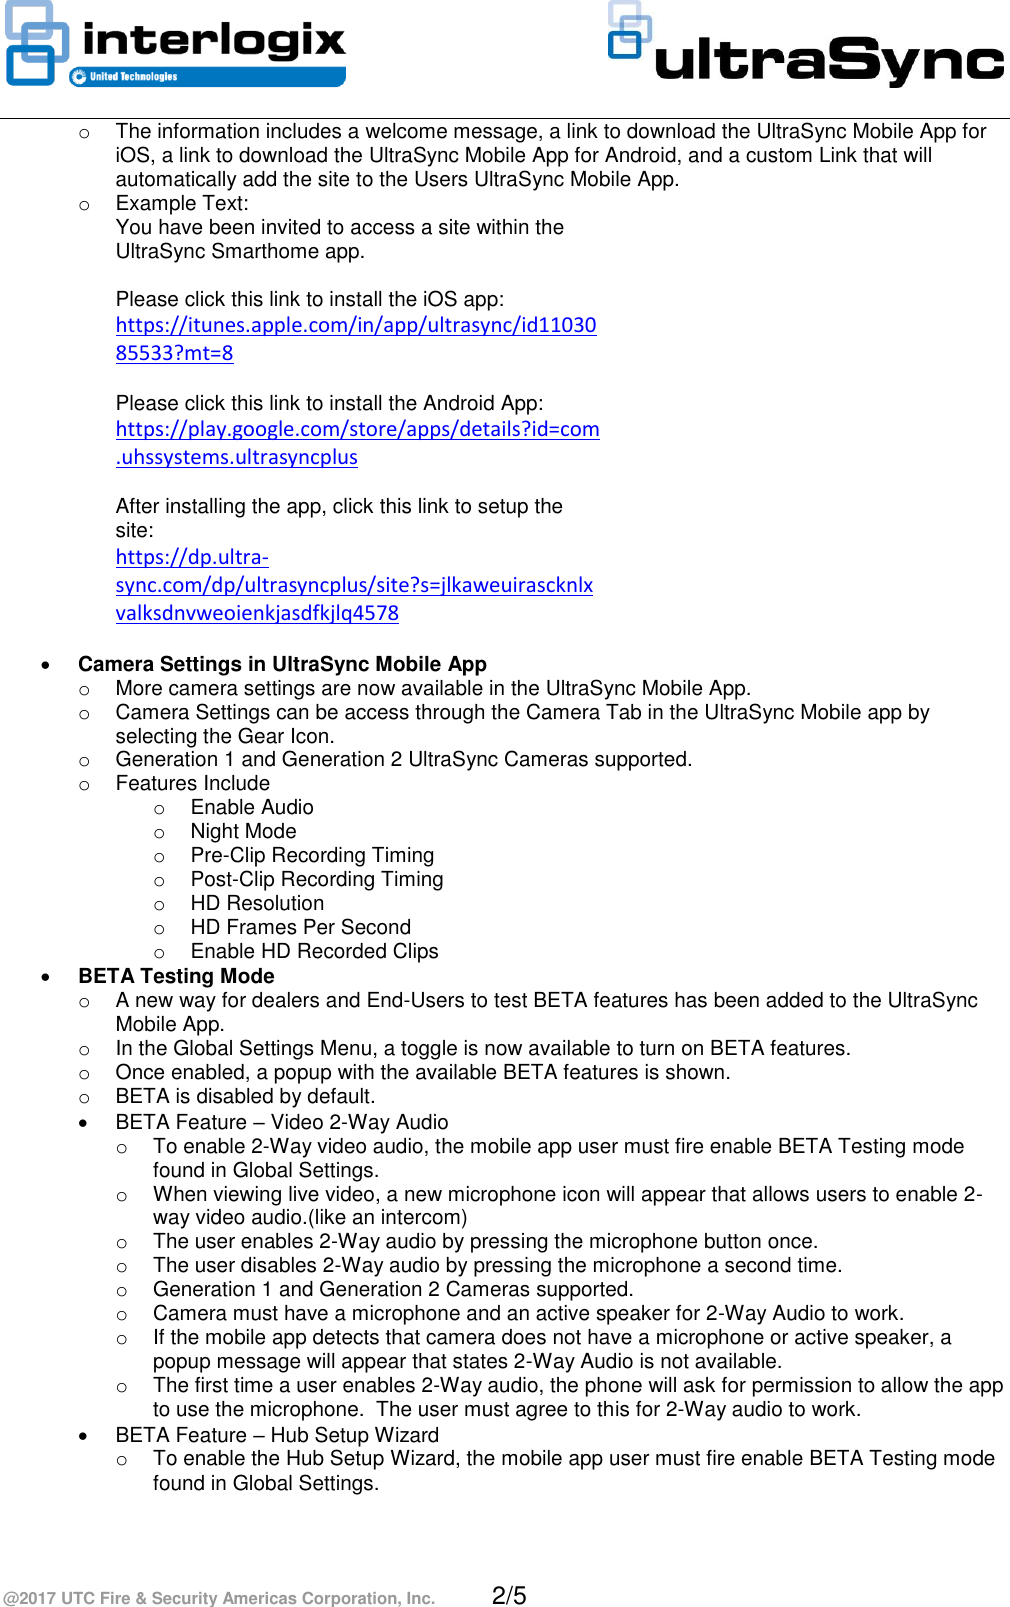 Page 2 of 5 - InterLogix Ultrasync-3.2-Service-Release-Notes UltraSec Release Note User Manual